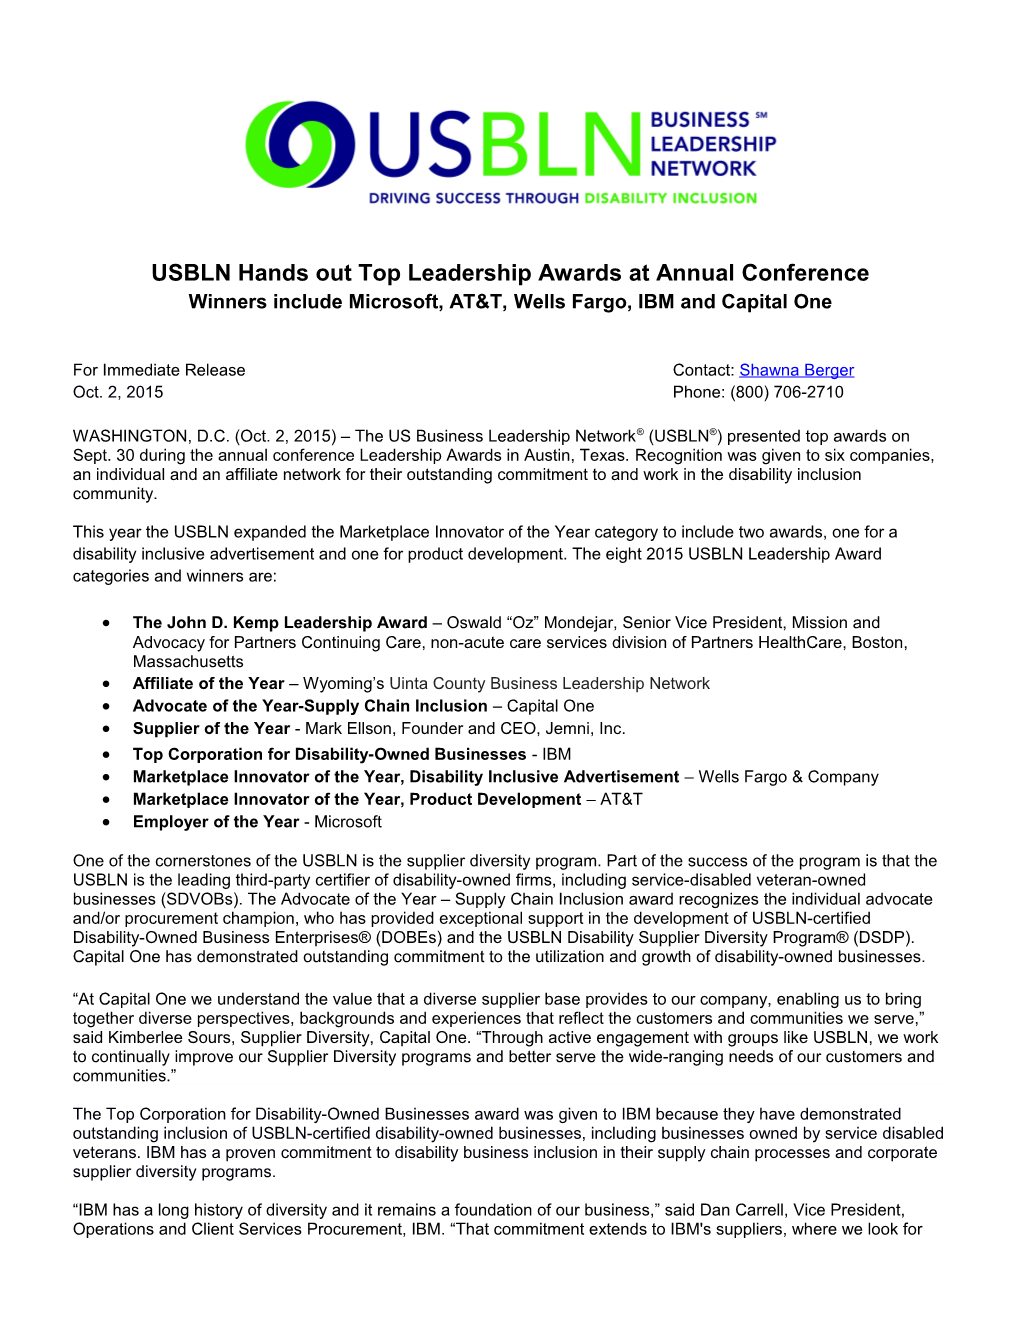 USBLN Hands out Top Leadership Awards at Annual Conference